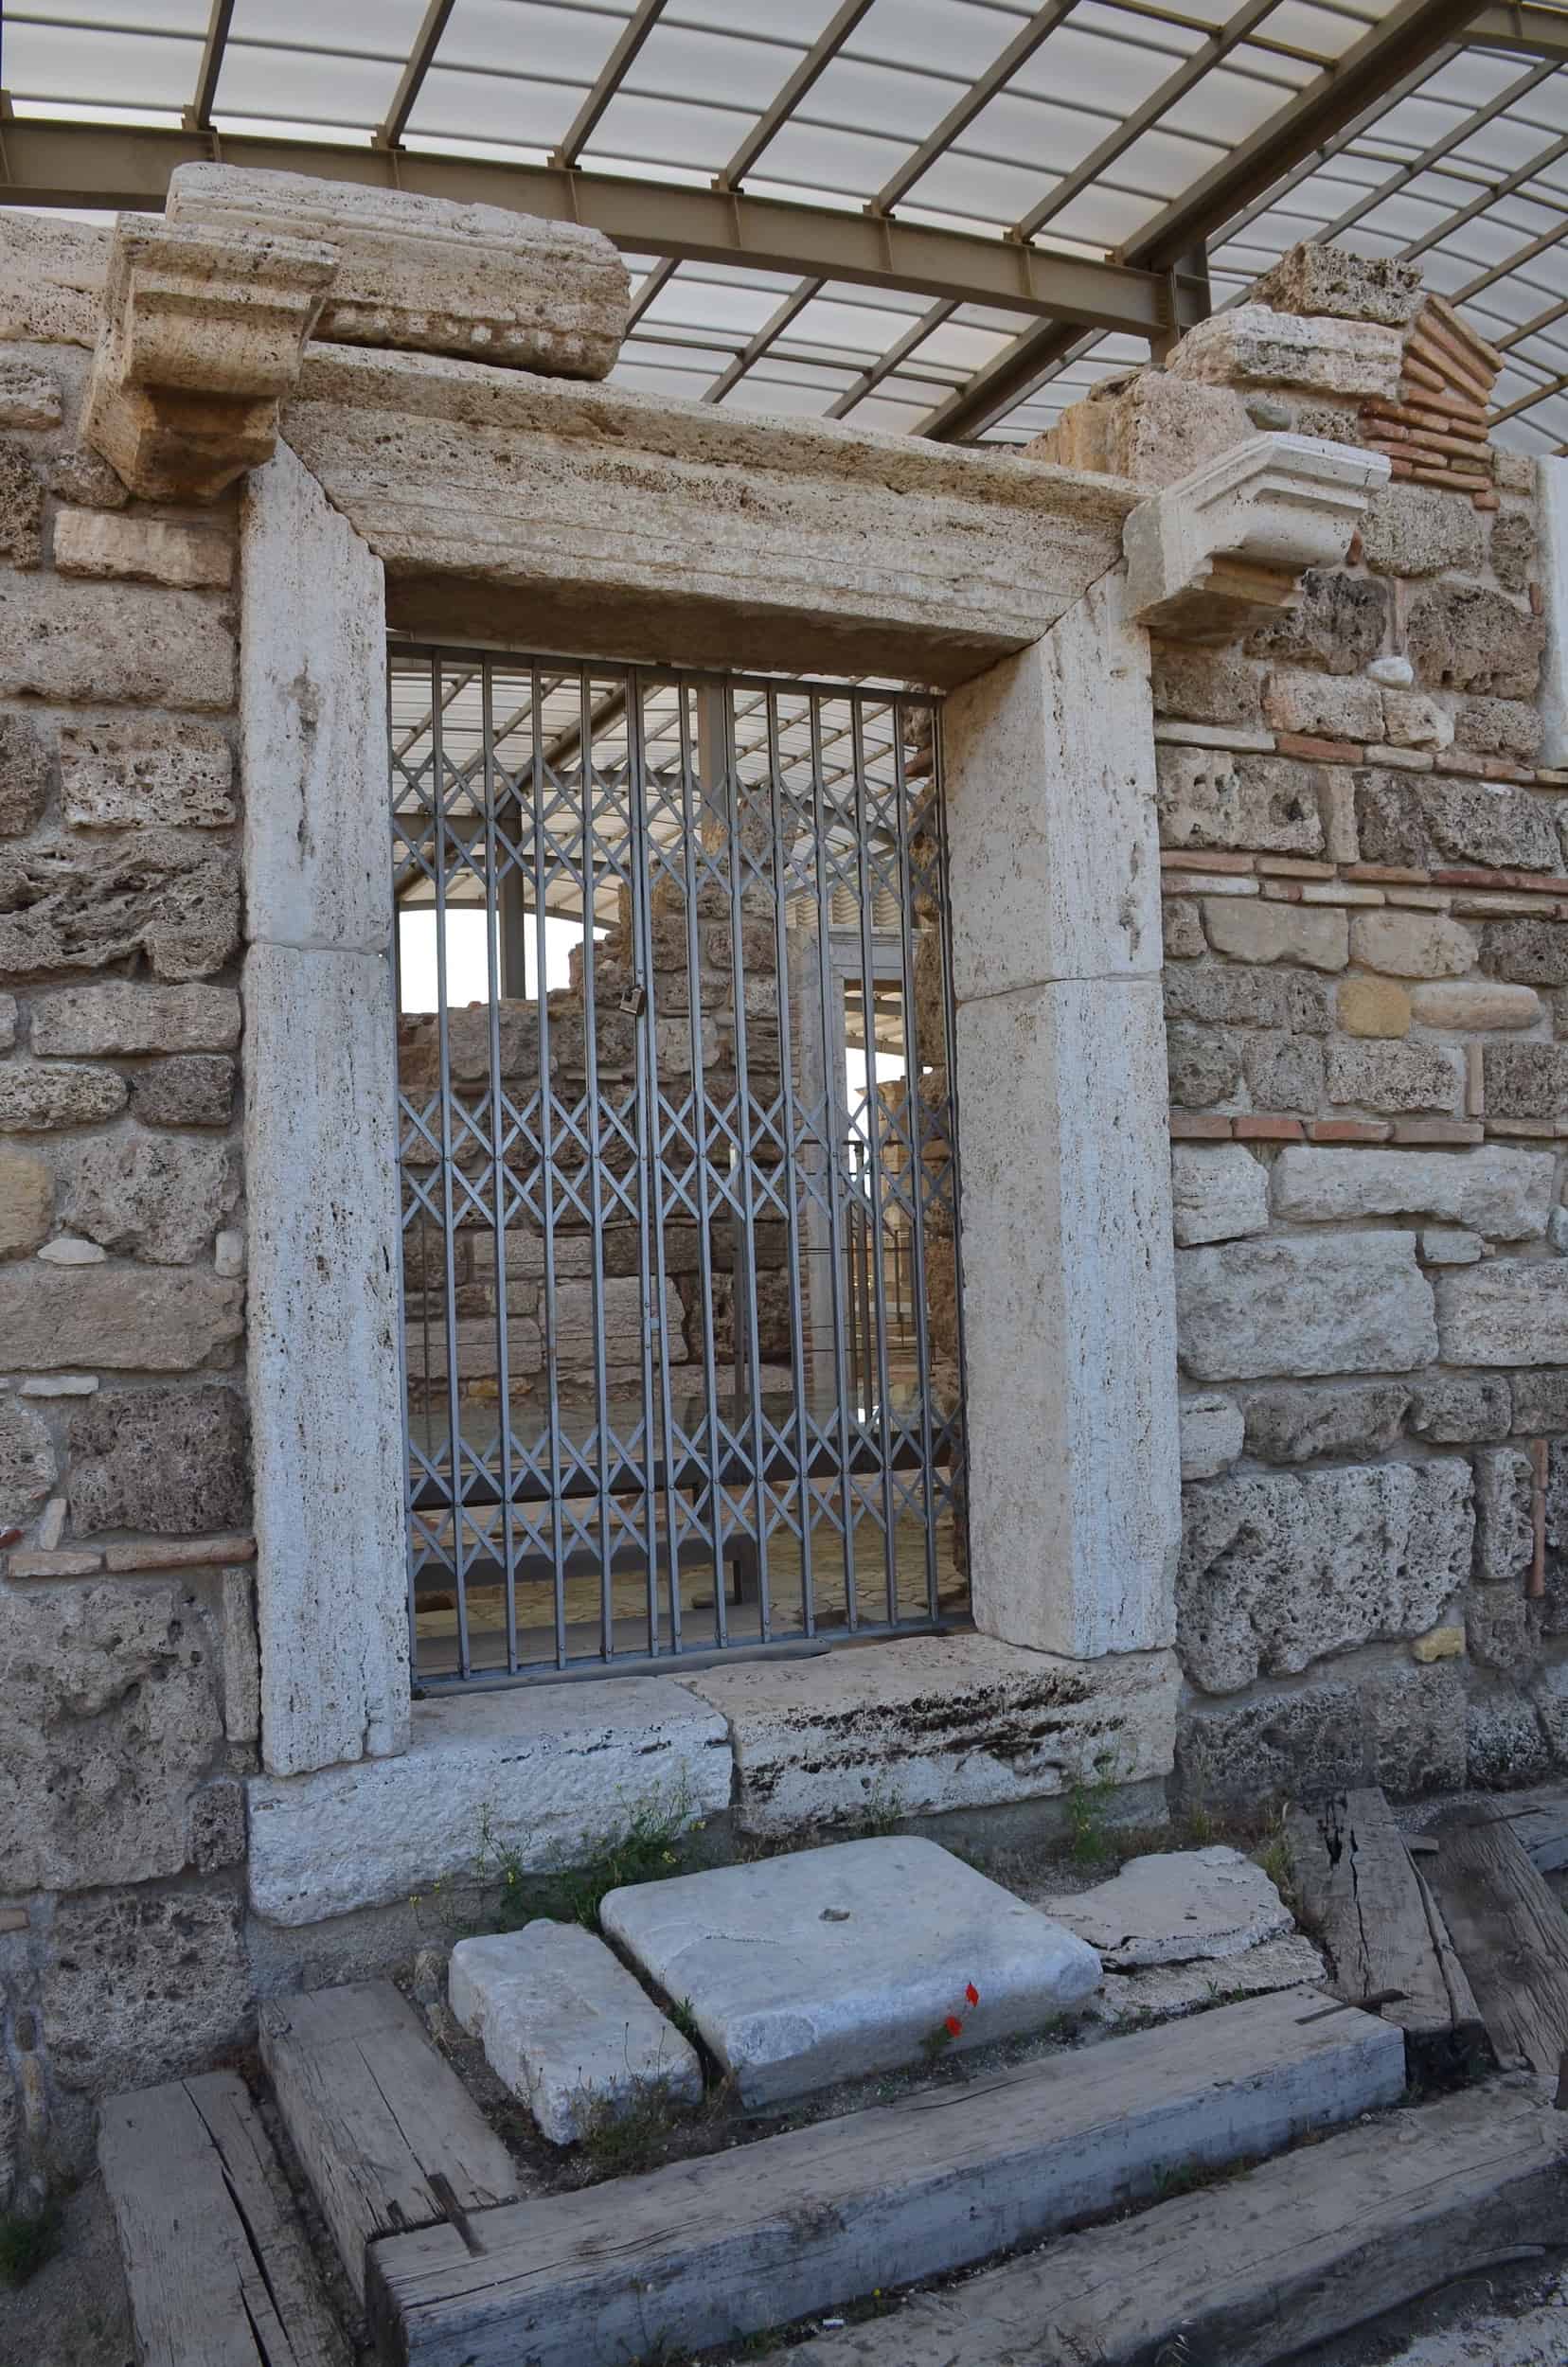 North entrance to the narthex at the Church of Laodicea